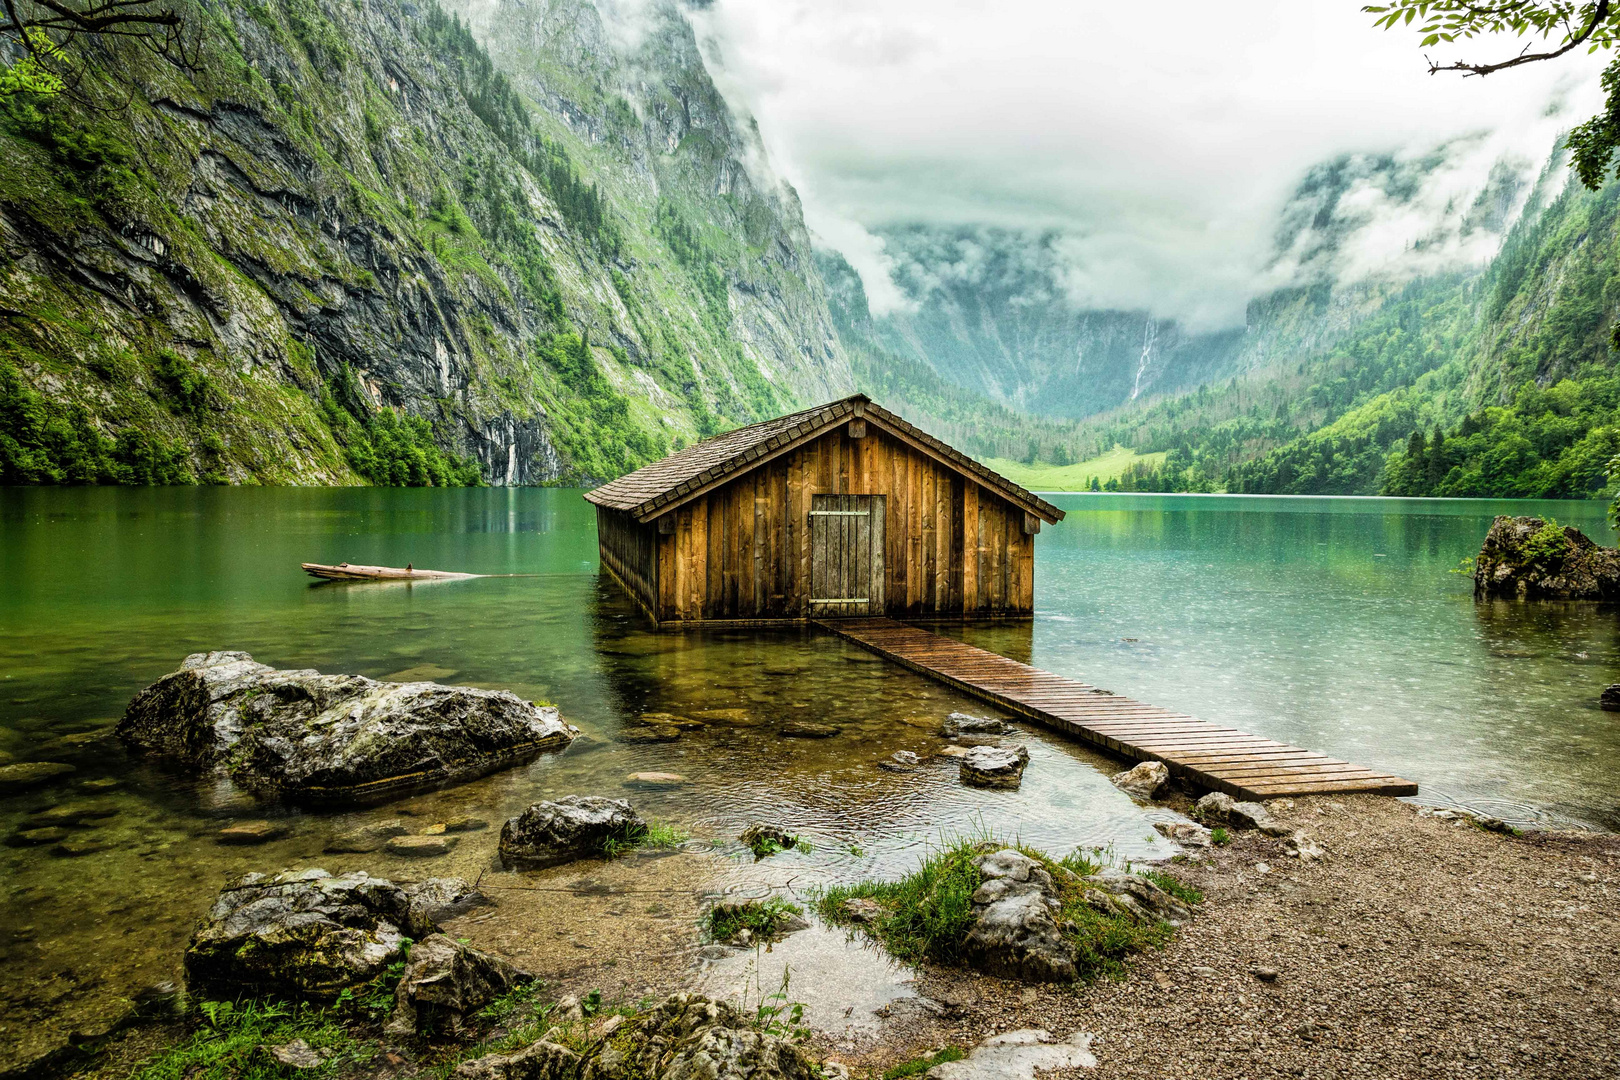 Boathouse on Obersee